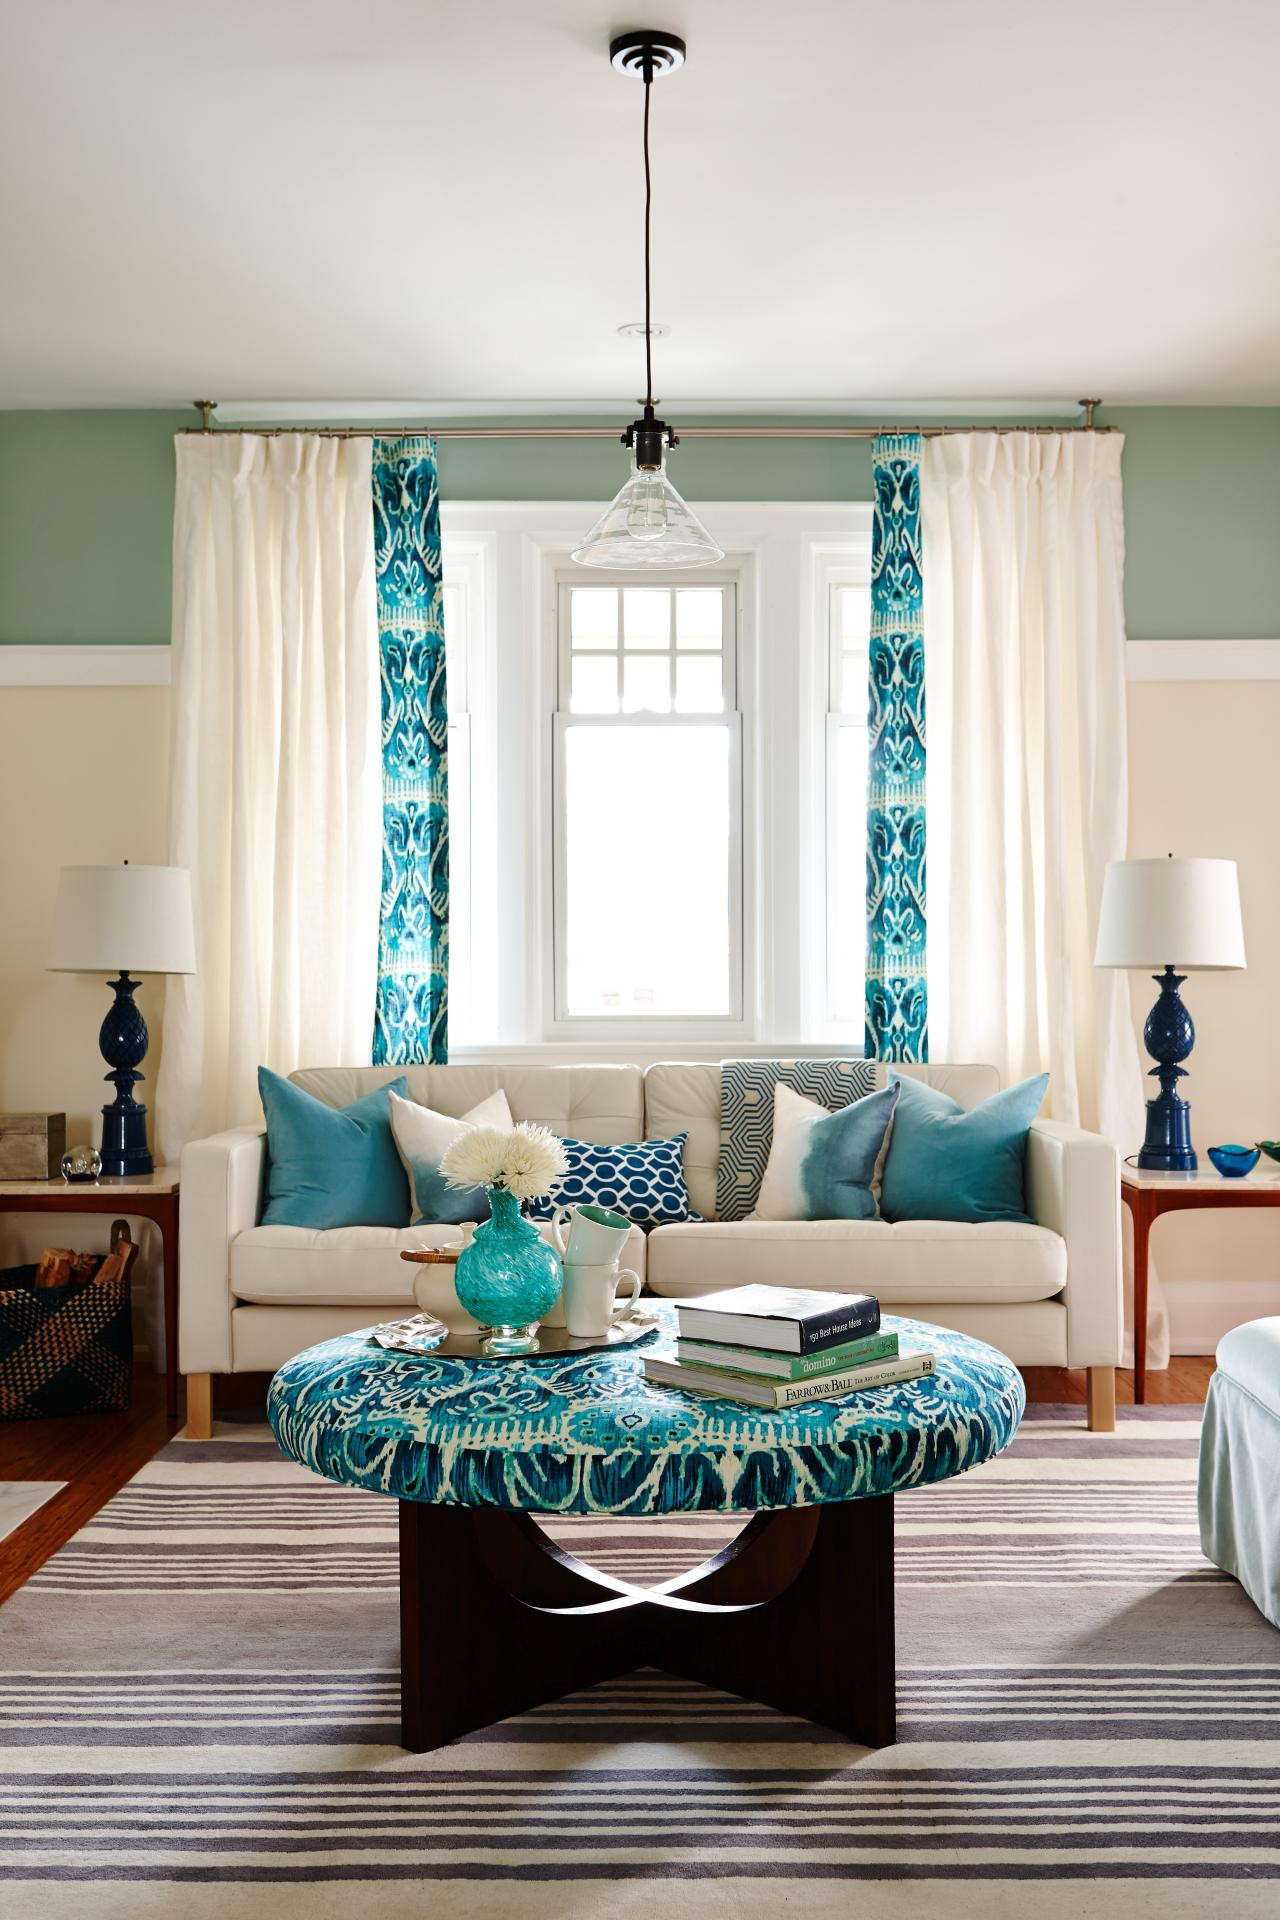 Aqua Curtains Living Room
 10 ideas for how to decorate your living room with